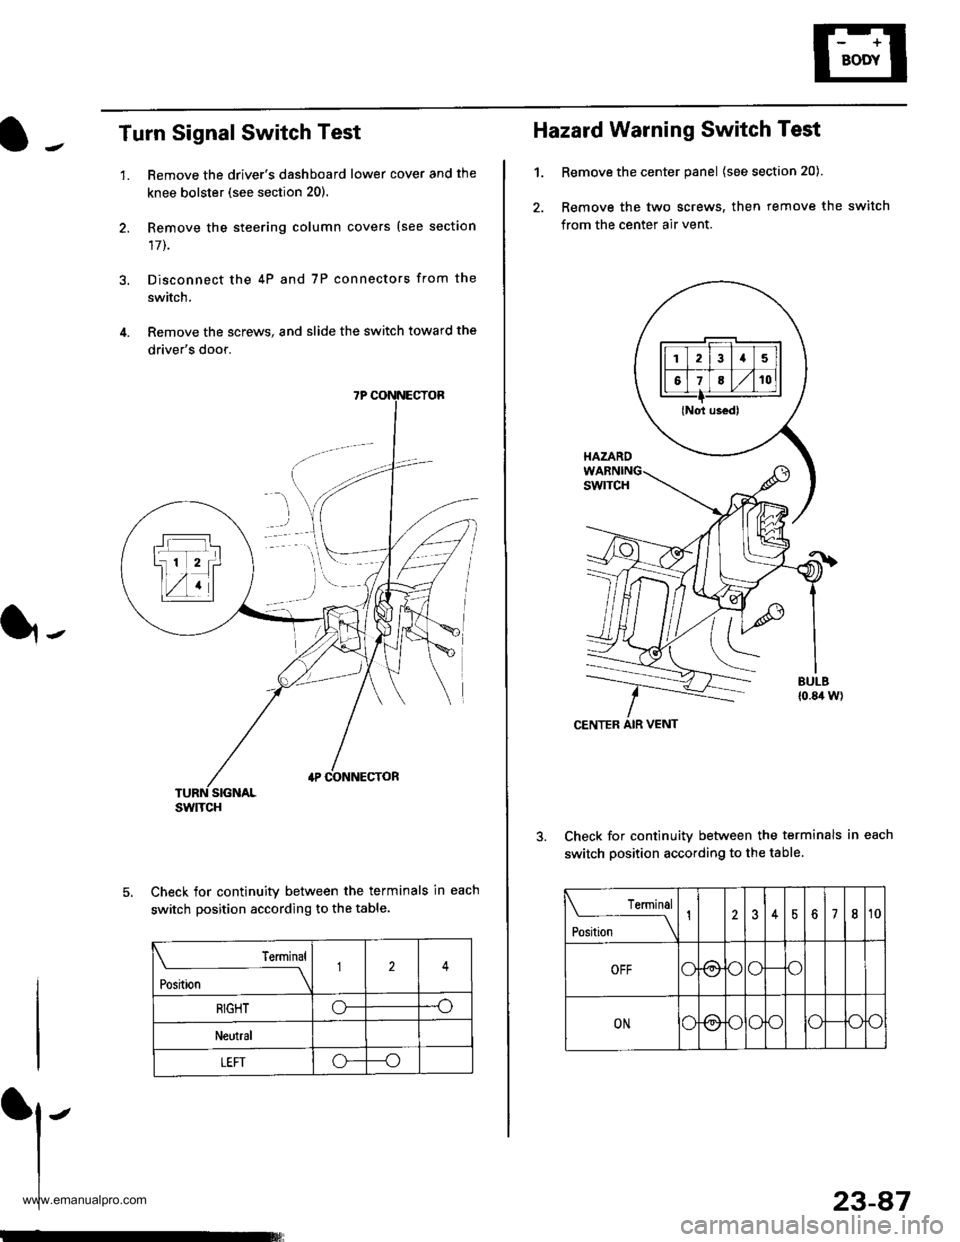 HONDA CR-V 2000 RD1-RD3 / 1.G Workshop Manual 
Turn Signal Switch Test
1.
4.
Remove the drivers dashboard lower cover and the
knee bolster (see section 20).
Remove the steering column covers {see section
17]-.
Disconnect the 4P and 7P connectors